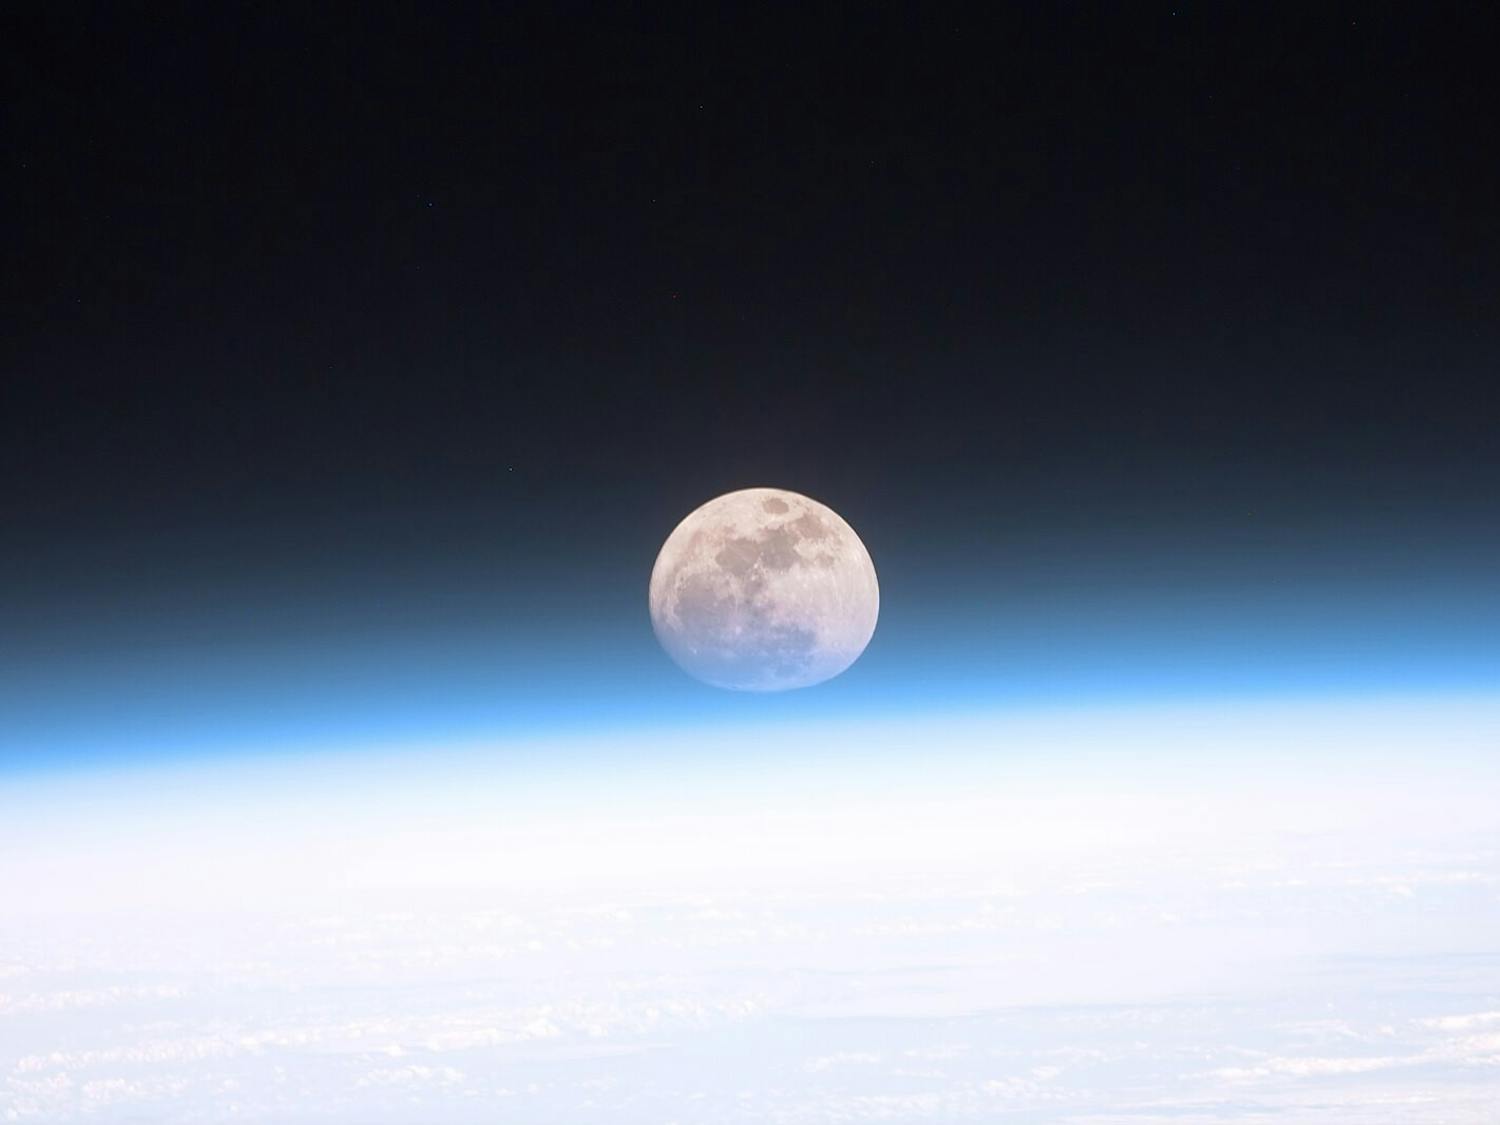 A recent discovery has shown that the moon is shrinking - and the effects are unpredictable (Photo courtesy of Wikimedia Commons / “Full moon partially obscured by atmosphere” by NASA. PD NASA. December 21, 1999). 